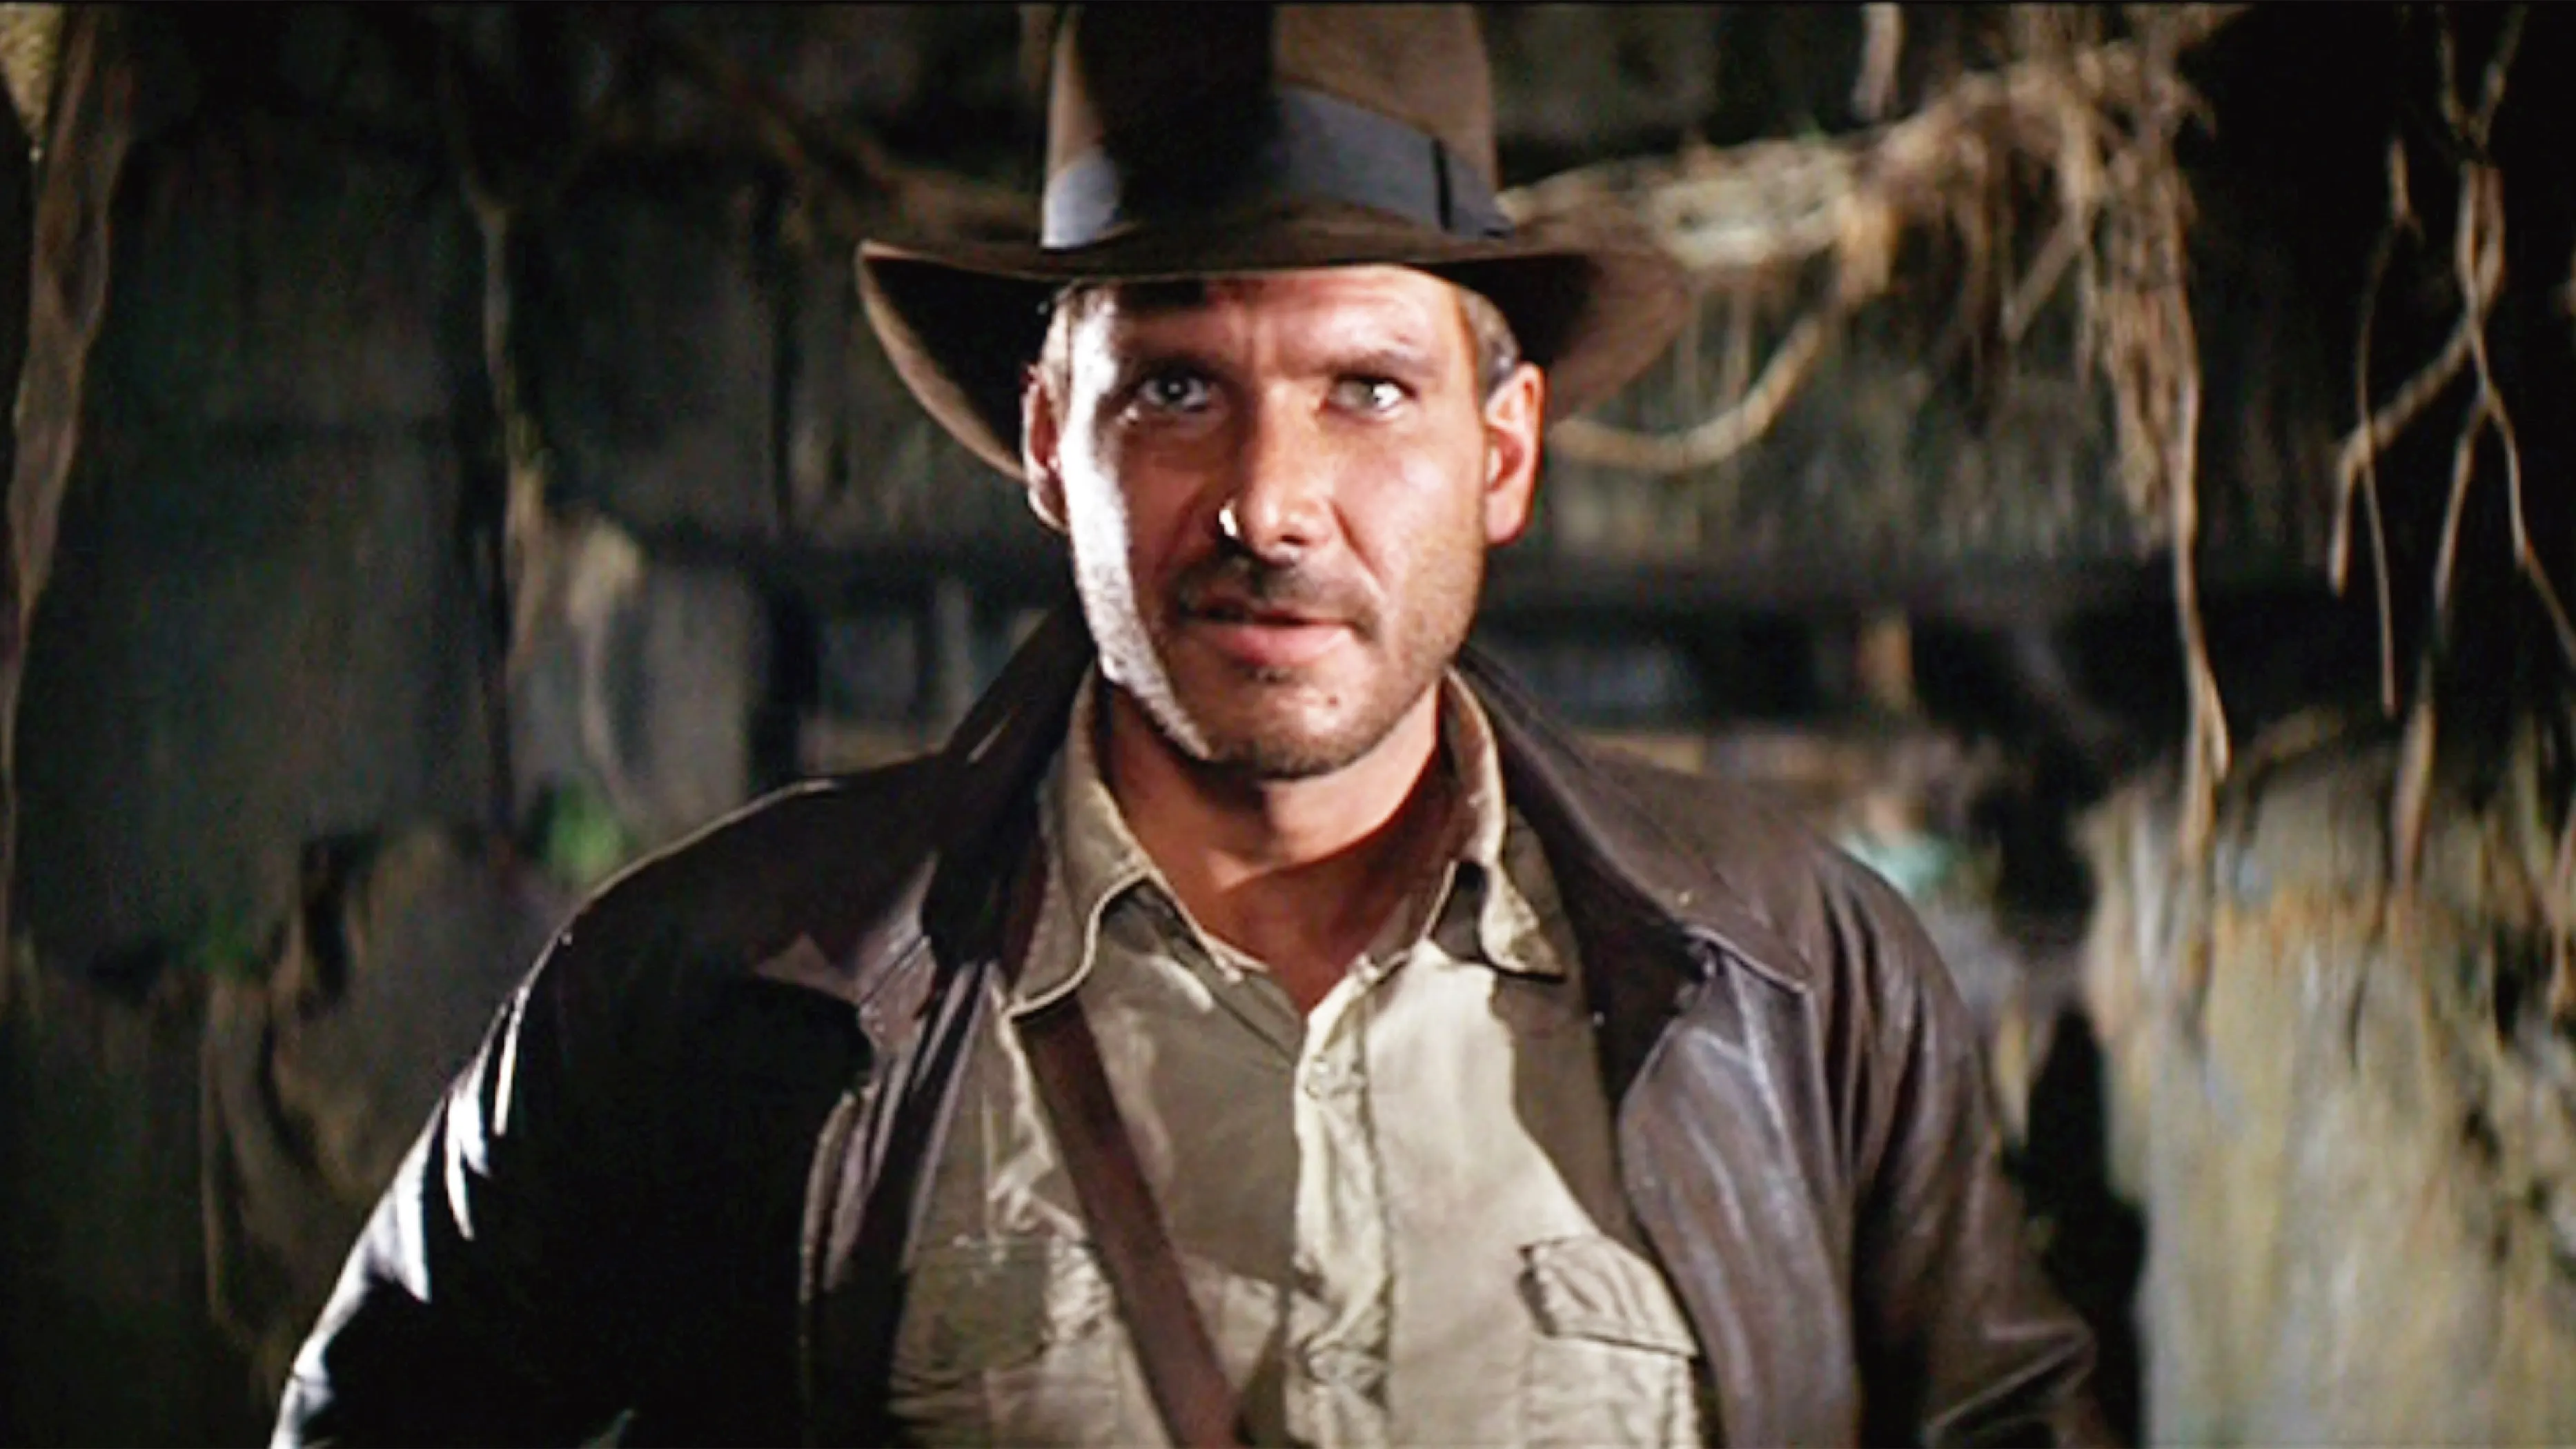 ‘Indiana Jones’ star Harrison Ford pushed back on iconic costume: ‘What ...